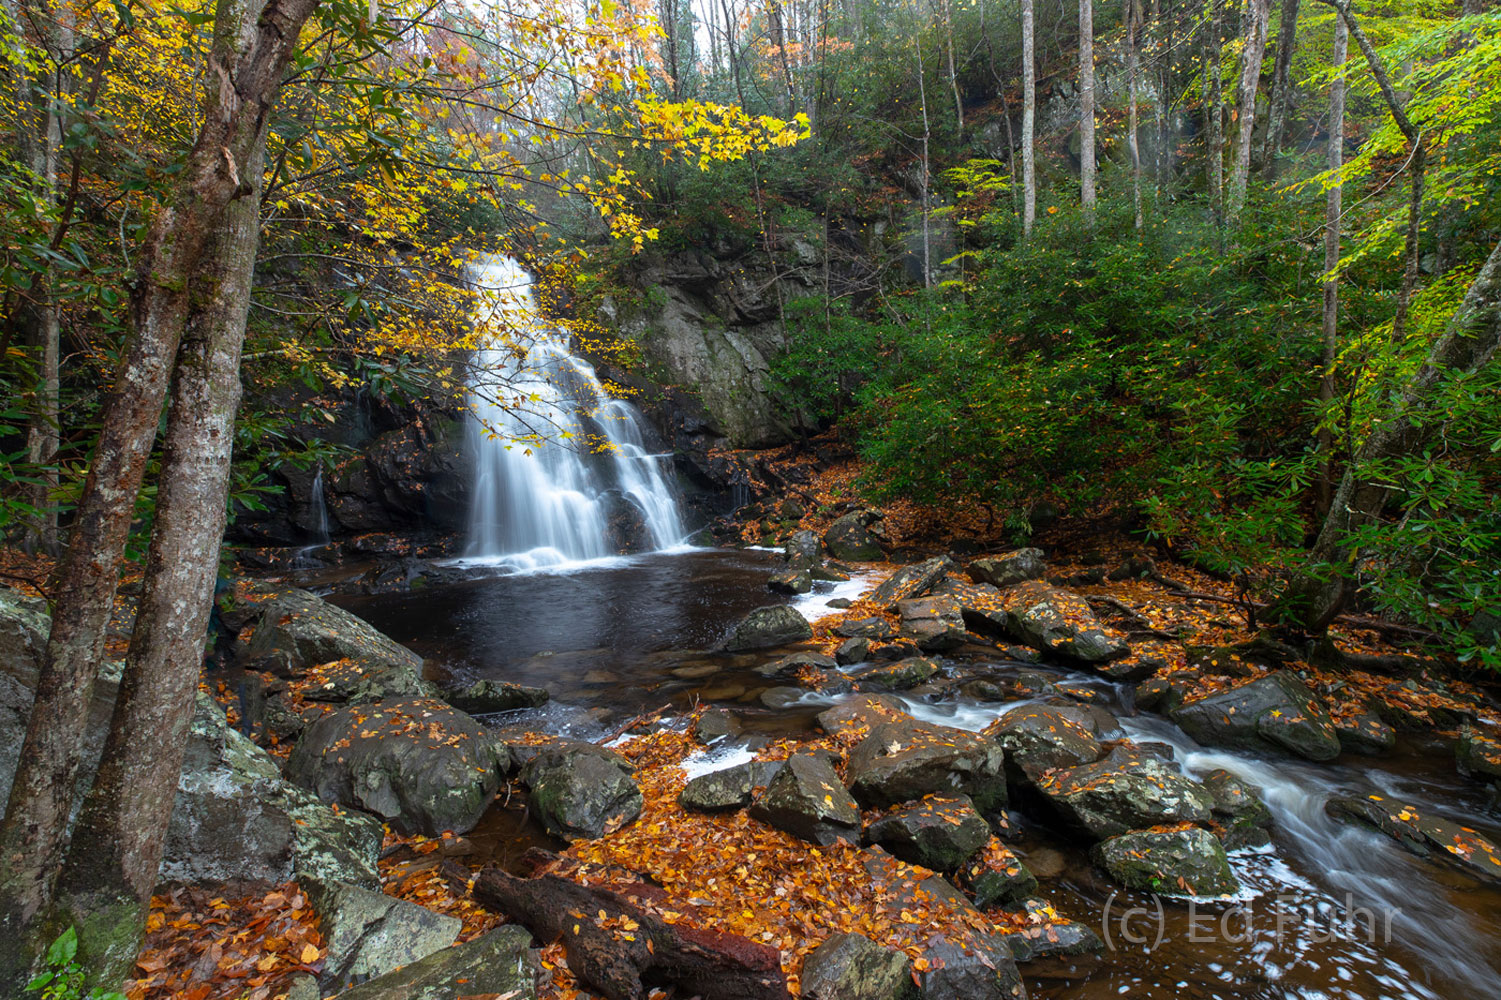 Few waterfalls are more special than Spruce Flats, especially after a good rain on an autumn day.